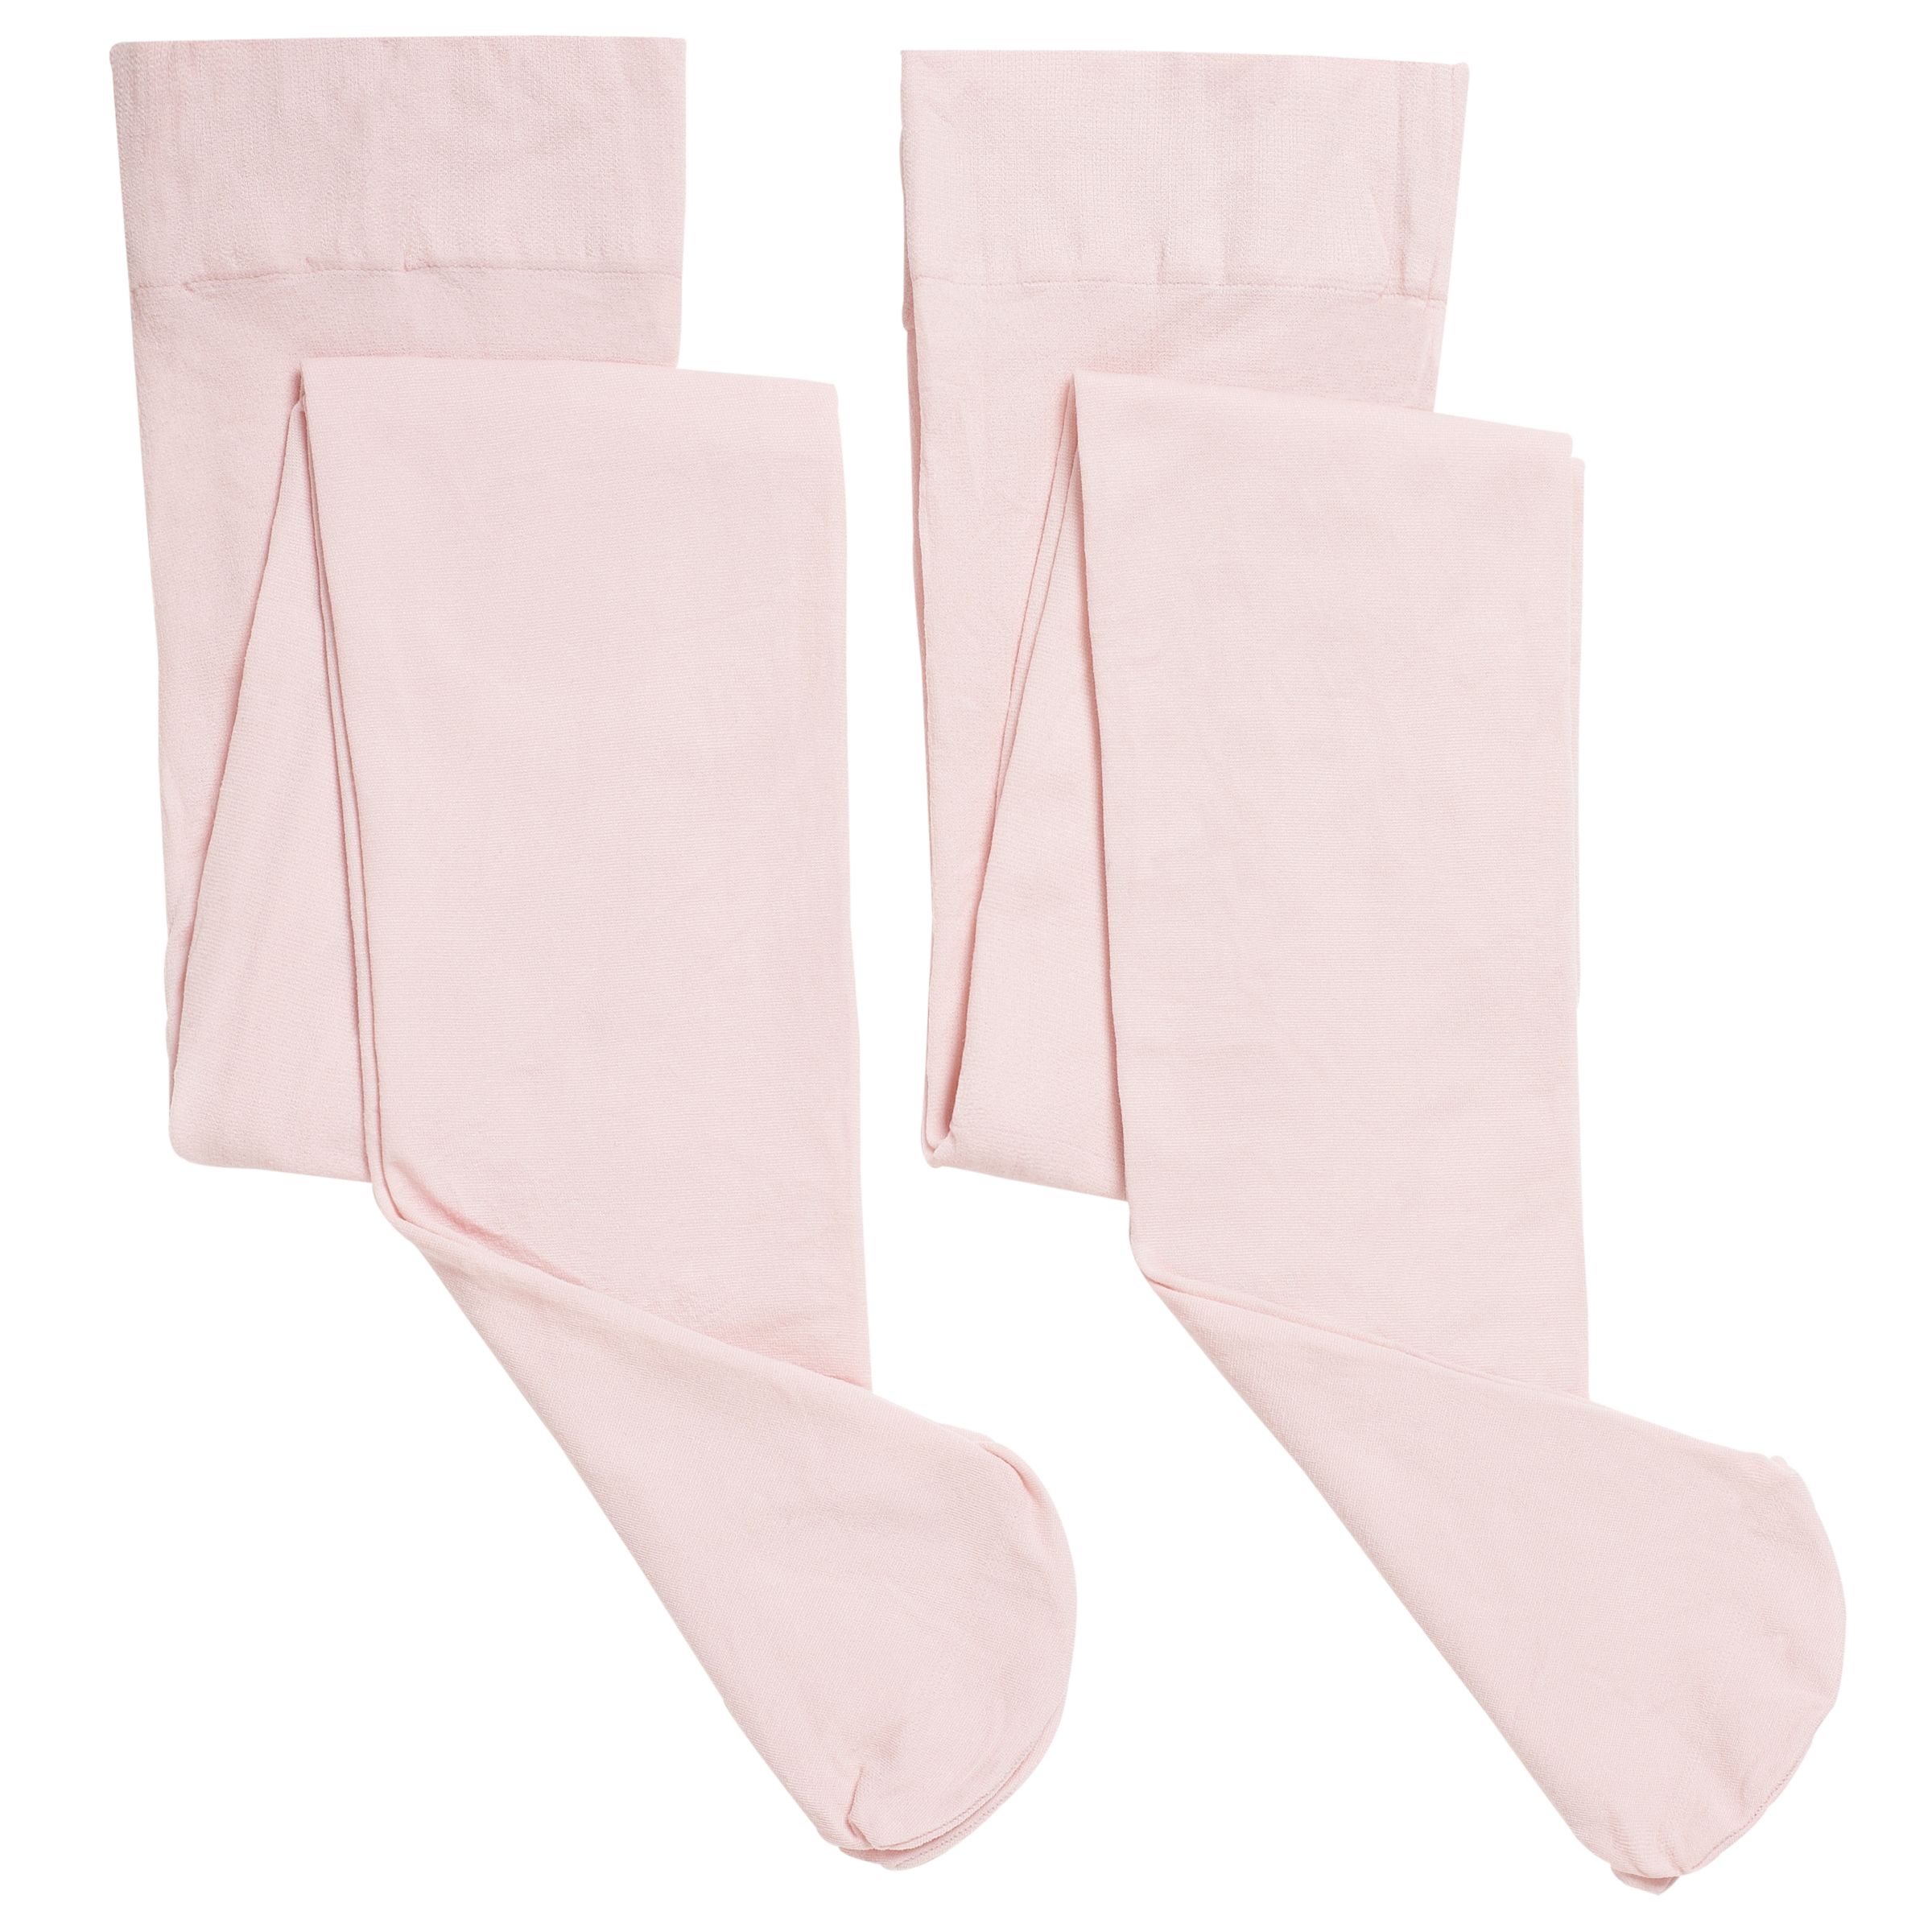 John Lewis ANYDAY Kids' Opaque Tights, Pack of 2, Pink, 7-8 Years